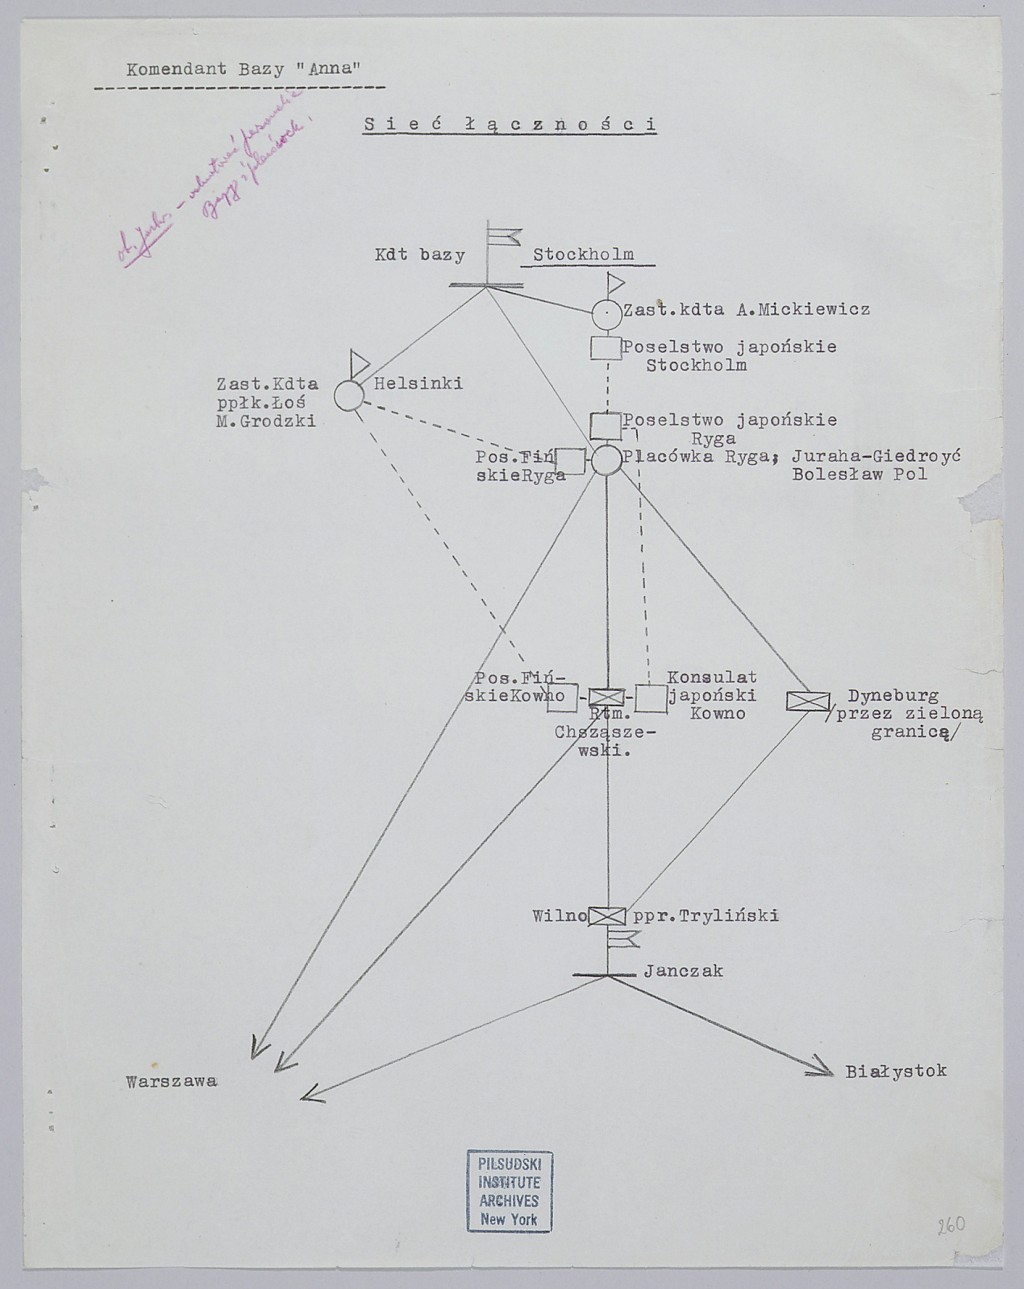 Diagram showing "the web of communications" between Japanese diplomats and members of the Polish resistance in the Baltic states and Scandinavia. The "Konsulat japonski Kowno" refers to Sugihara. Despite its ties with Nazi Germany, Japan pursued its own course in foreign policy. After the Germans occupied Poland and the Netherlands, Japan continued relations with both the Polish and Dutch governments-in-exile in London. July 1940.